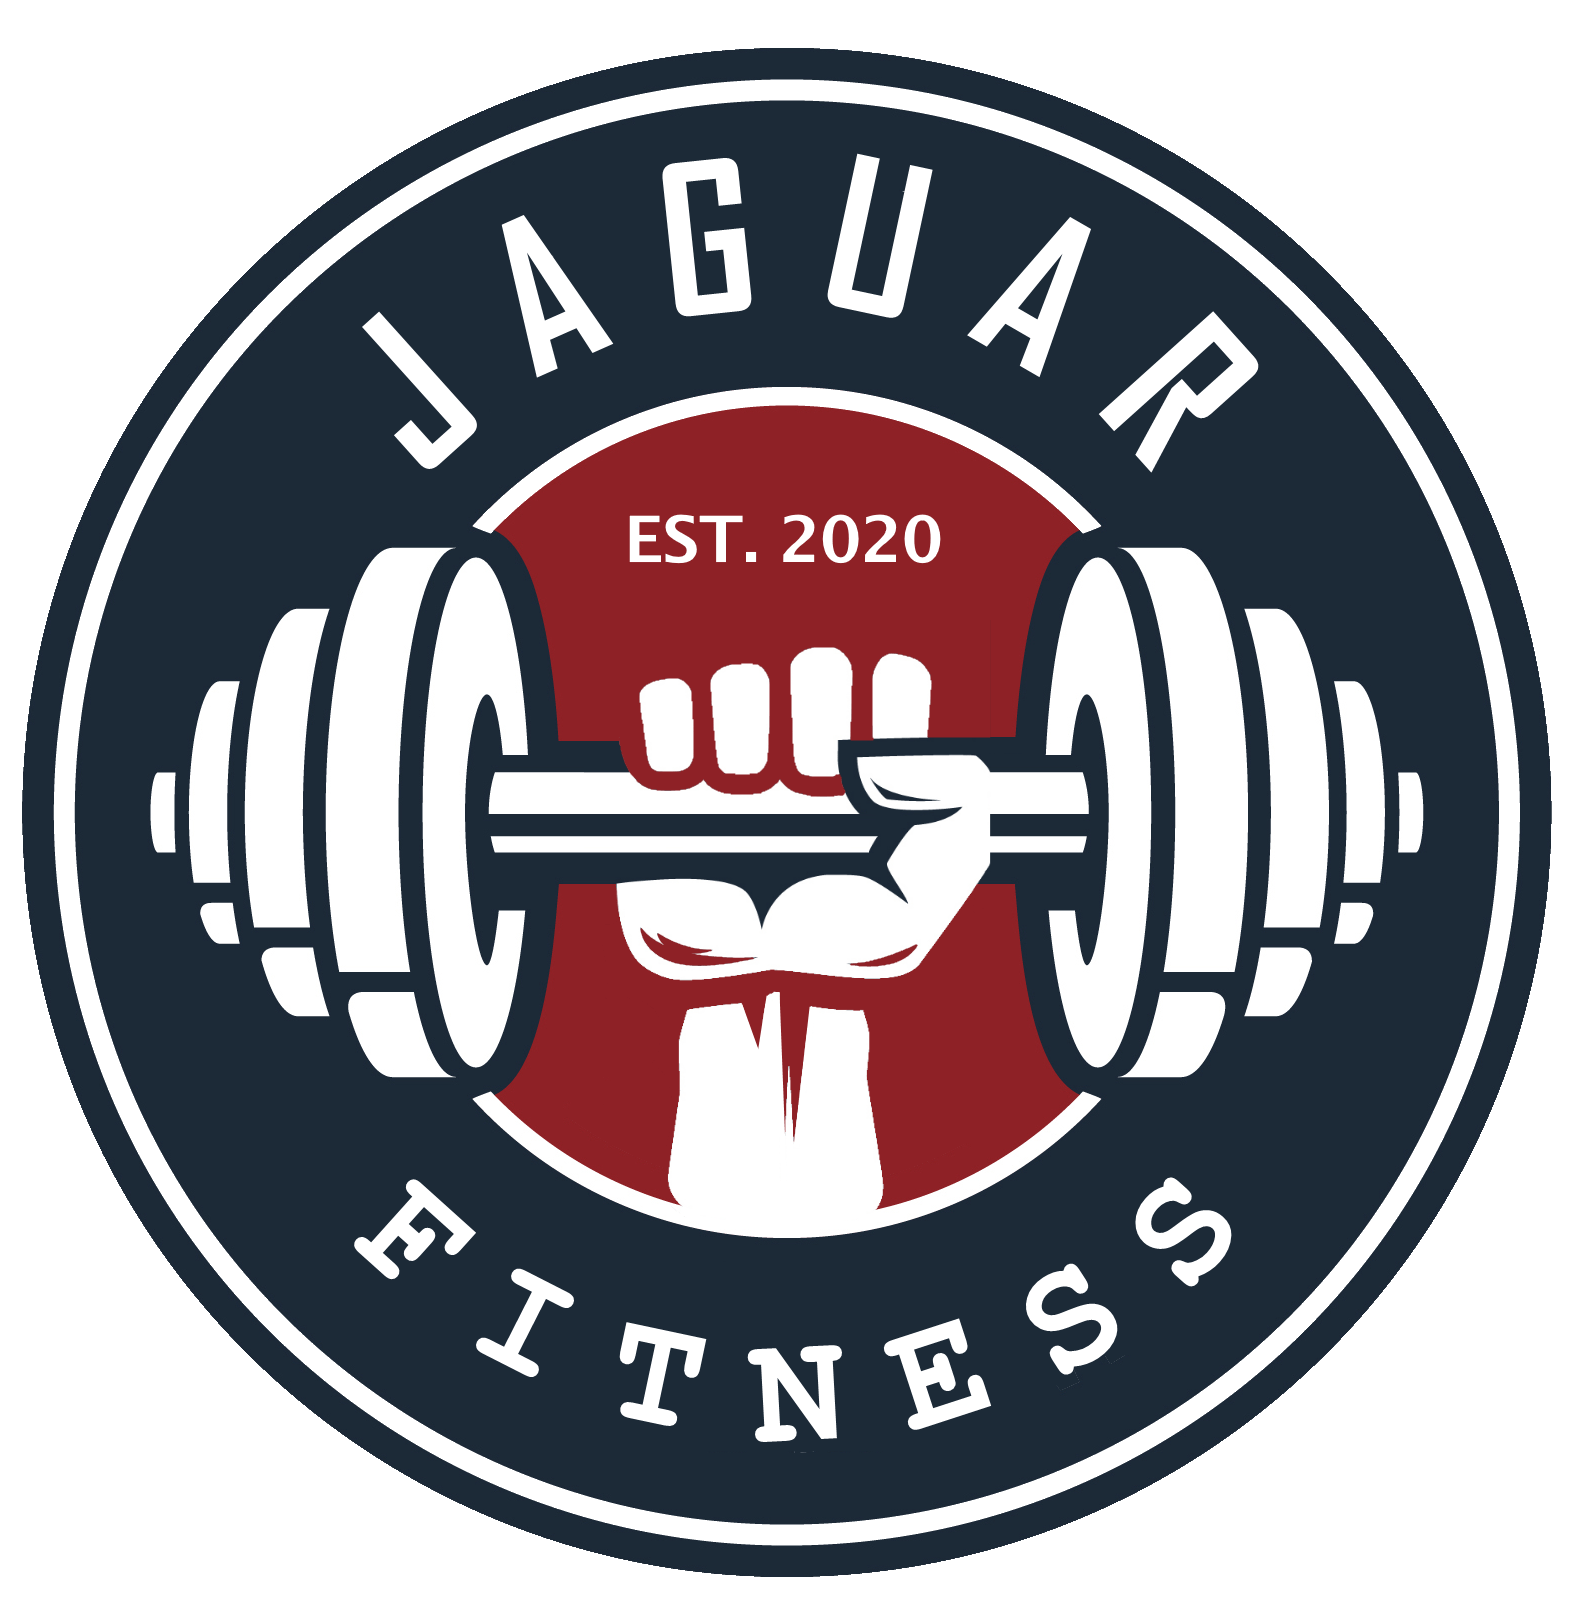 Jaguar Fitness - Online Sports and Fitness Store